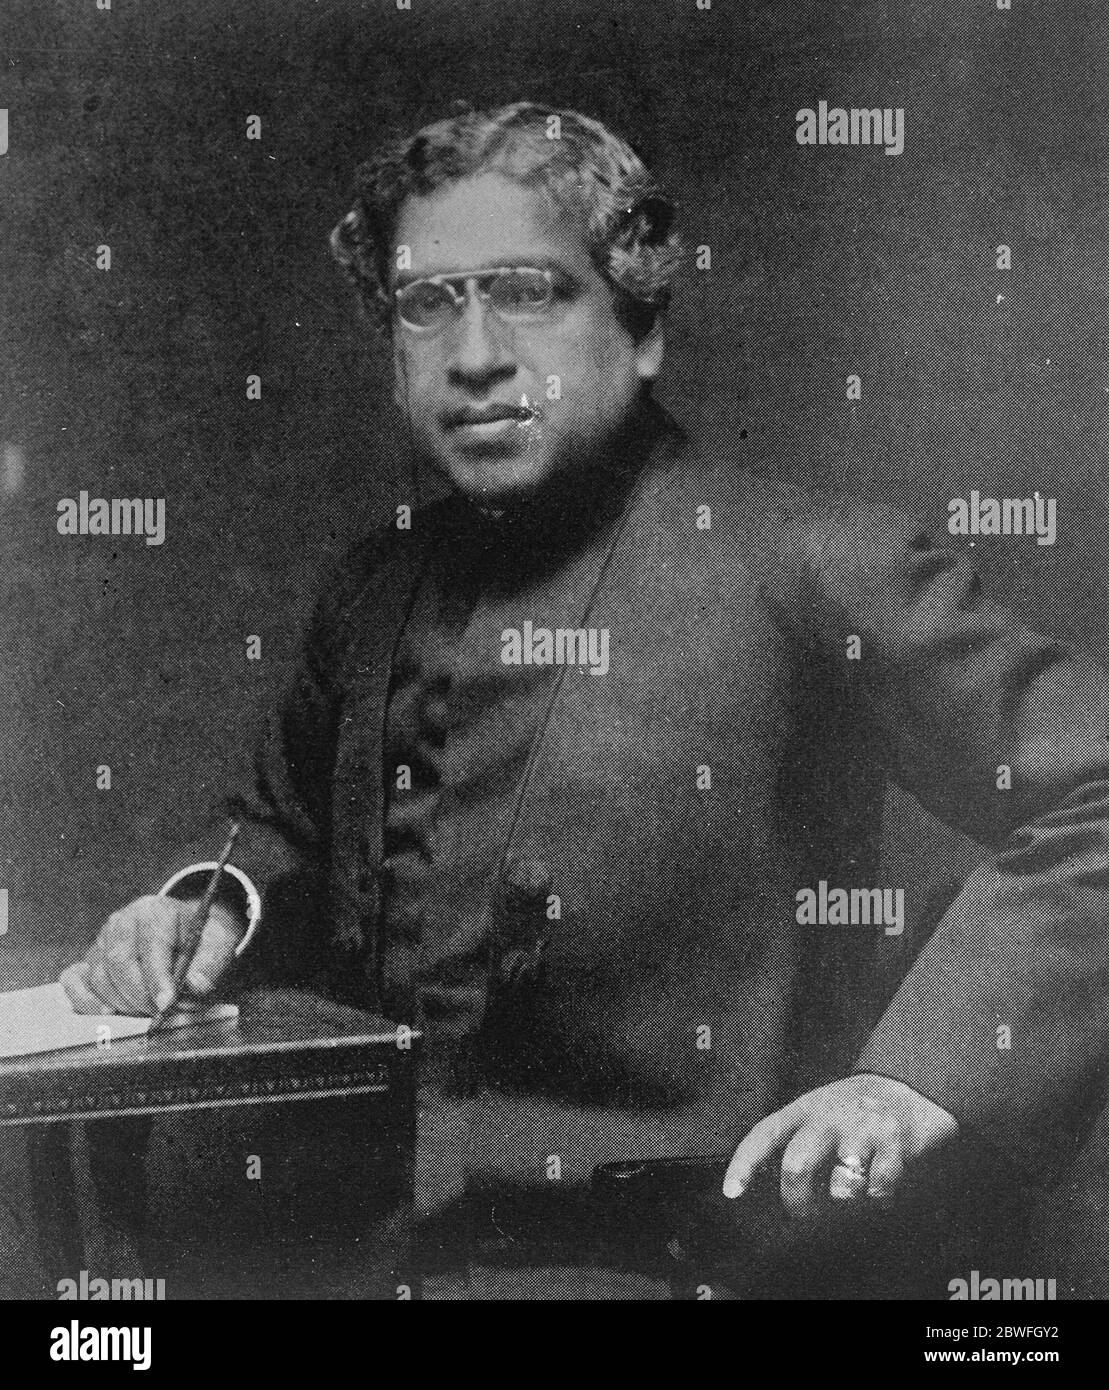 India 's Greatest Scientist Sir Jagadish Chandra , the eminent Indian scientist who has enriched biology with epoch making discoveries 28 February 1923 Acharya Sir Jagadish Chandra Bose Stock Photo